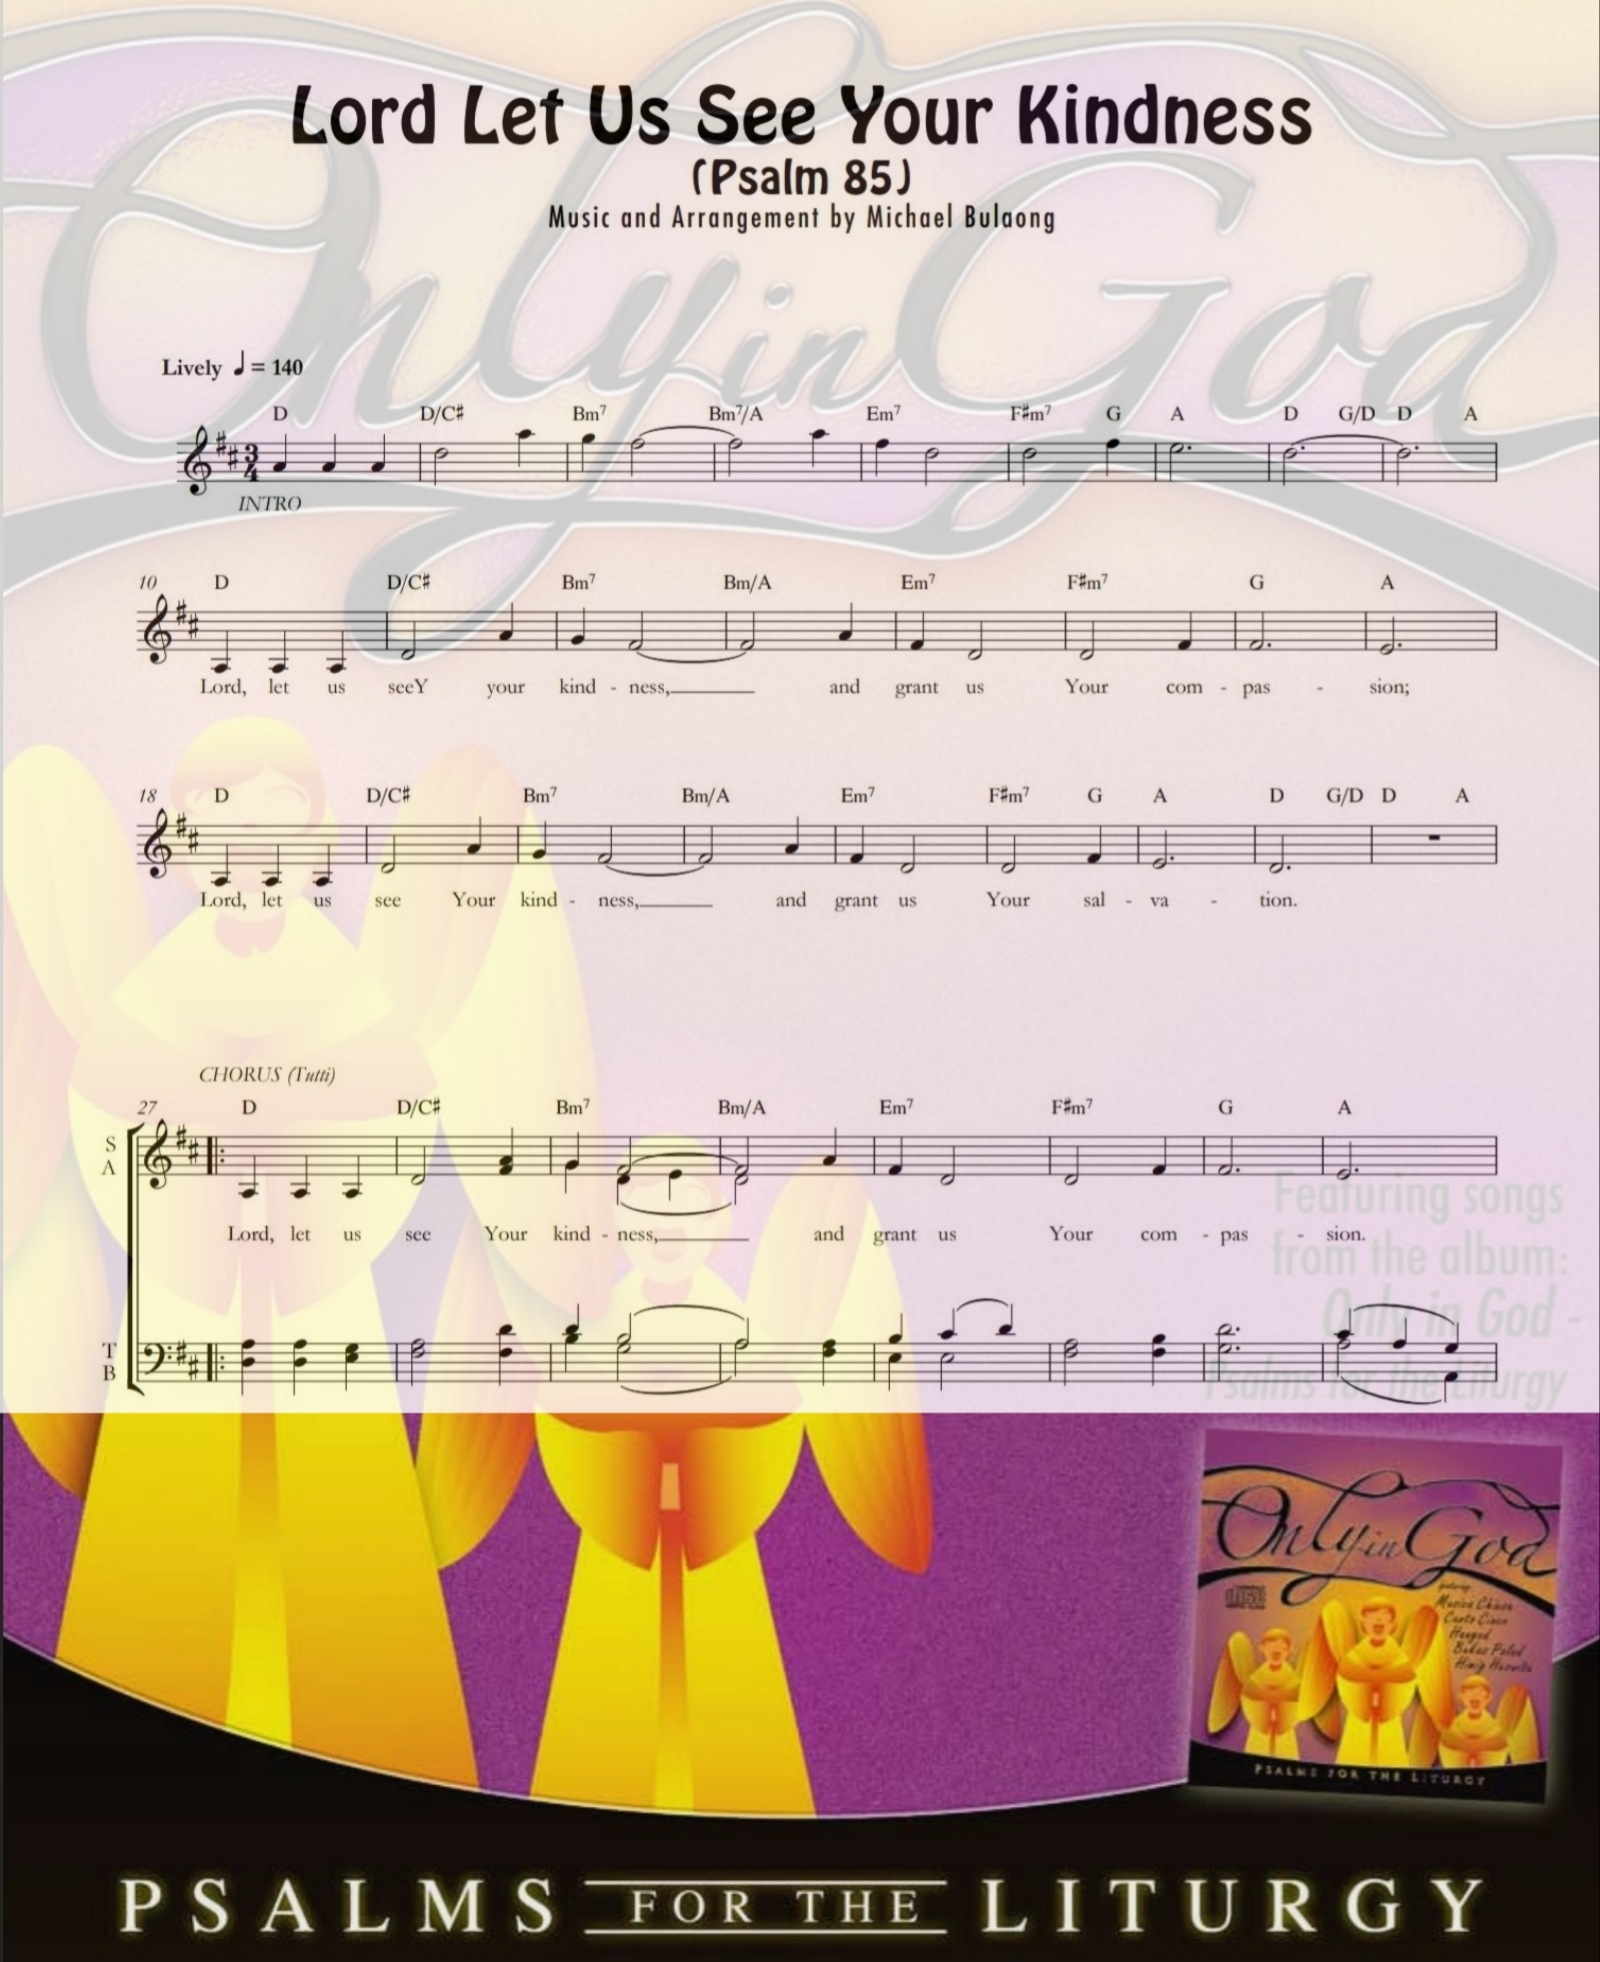 LORD LET US SEE YOUR KINDNESS – Music Sheet